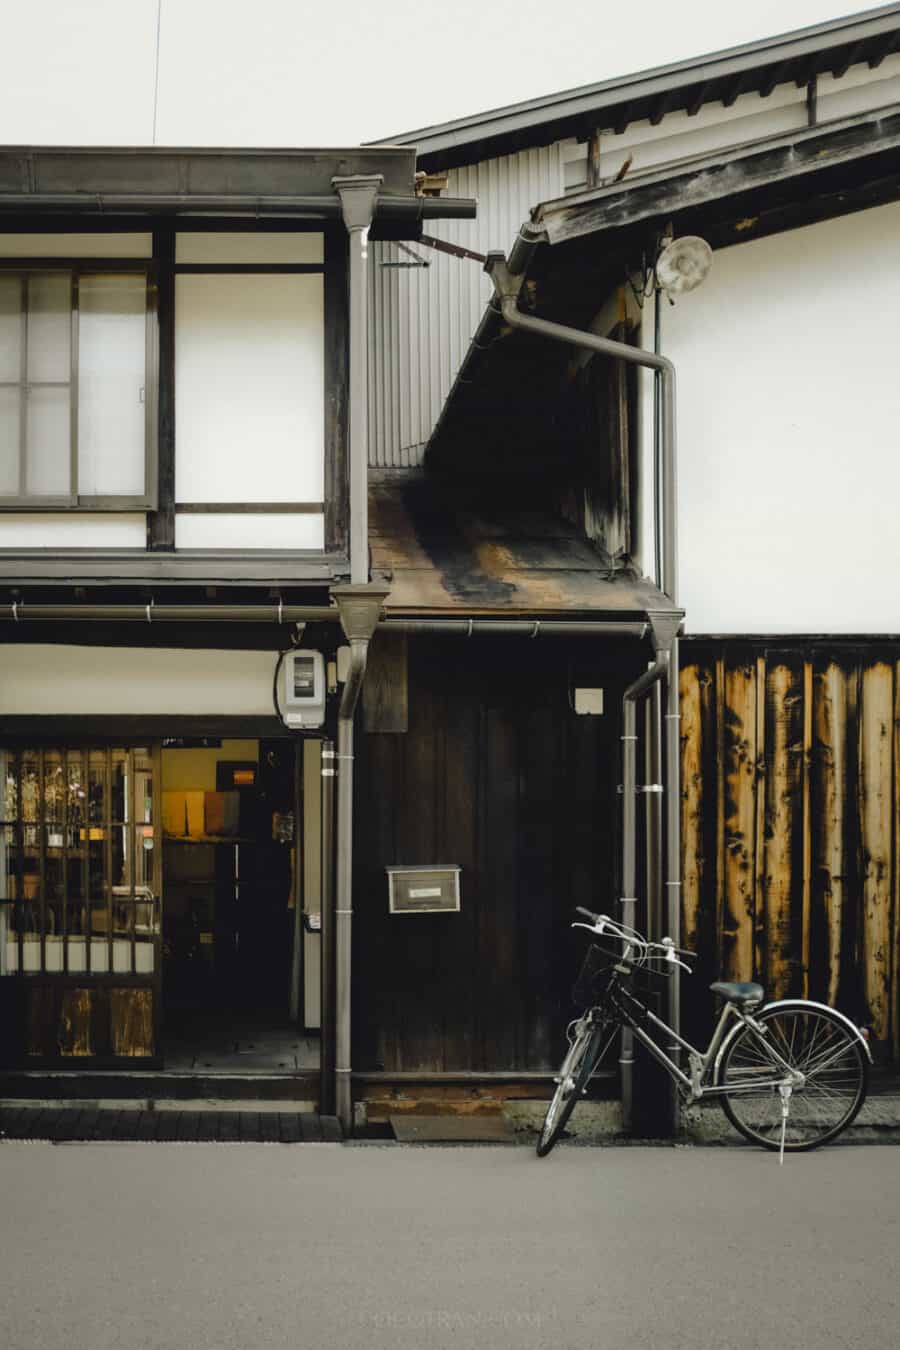 Coco Tran — Aesthetic Travel Blog By Film Photographer Coco Tran https://cocotran.com/guide-to-visiting-old-town-takayama/